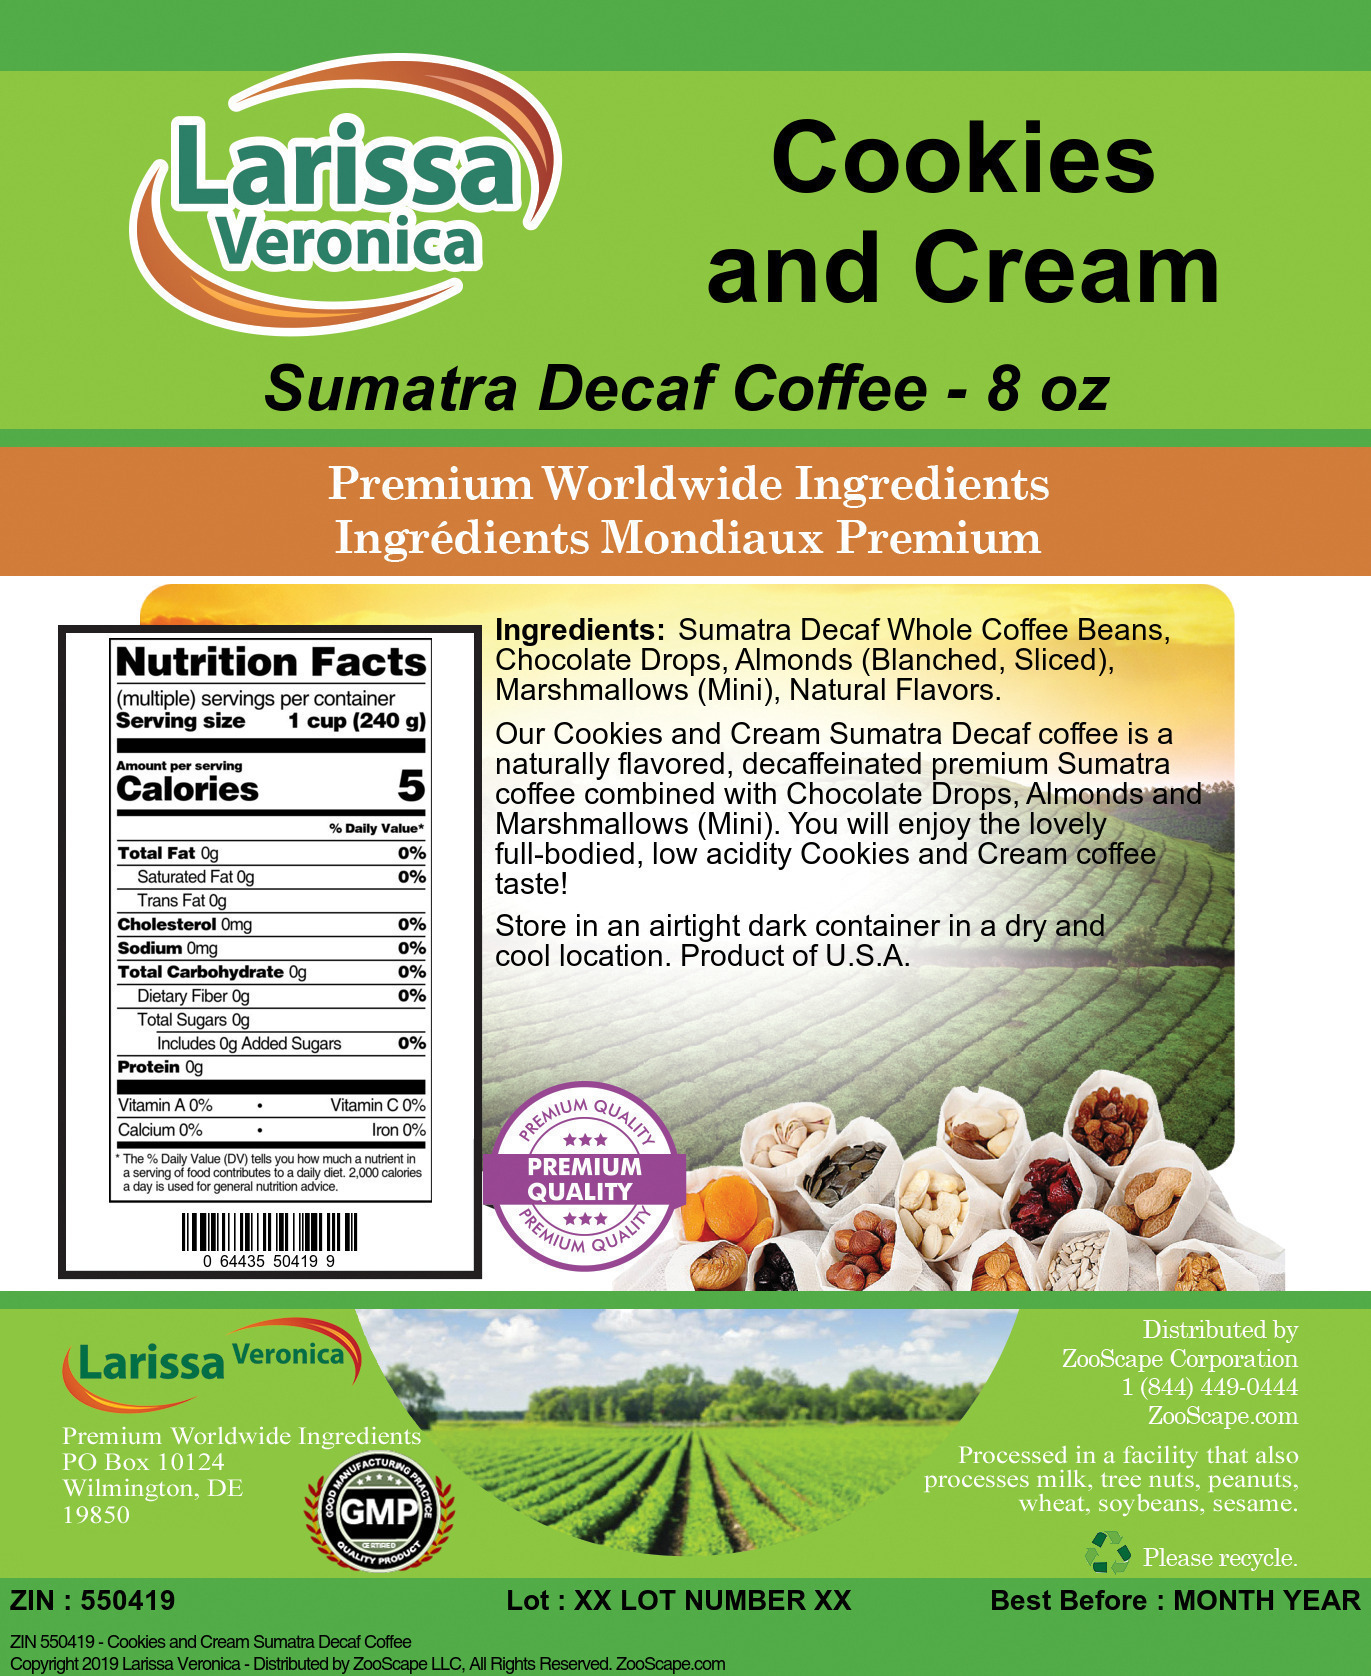 Cookies and Cream Sumatra Decaf Coffee - Label